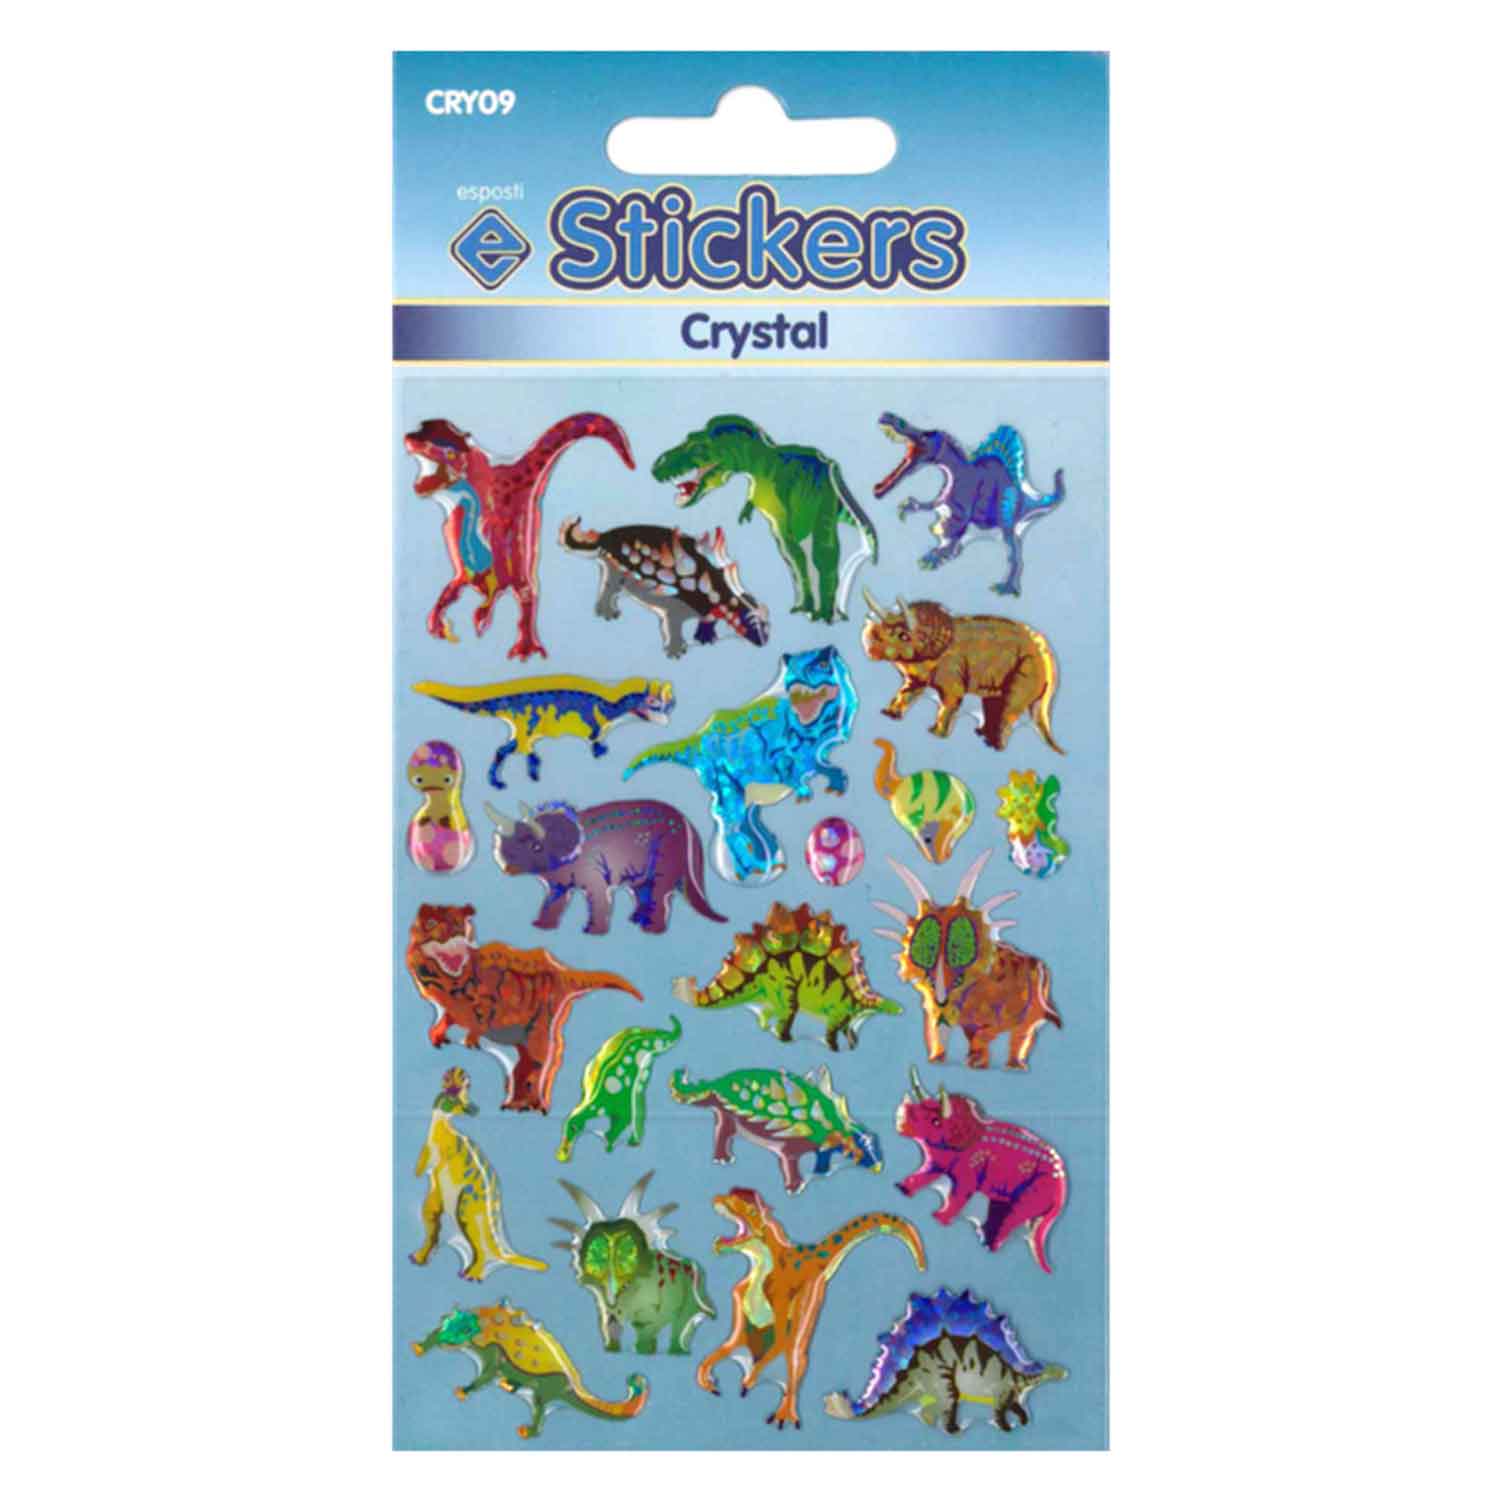 Dinosaurs Self Adhesive Novelty Stickers - Pack of 10